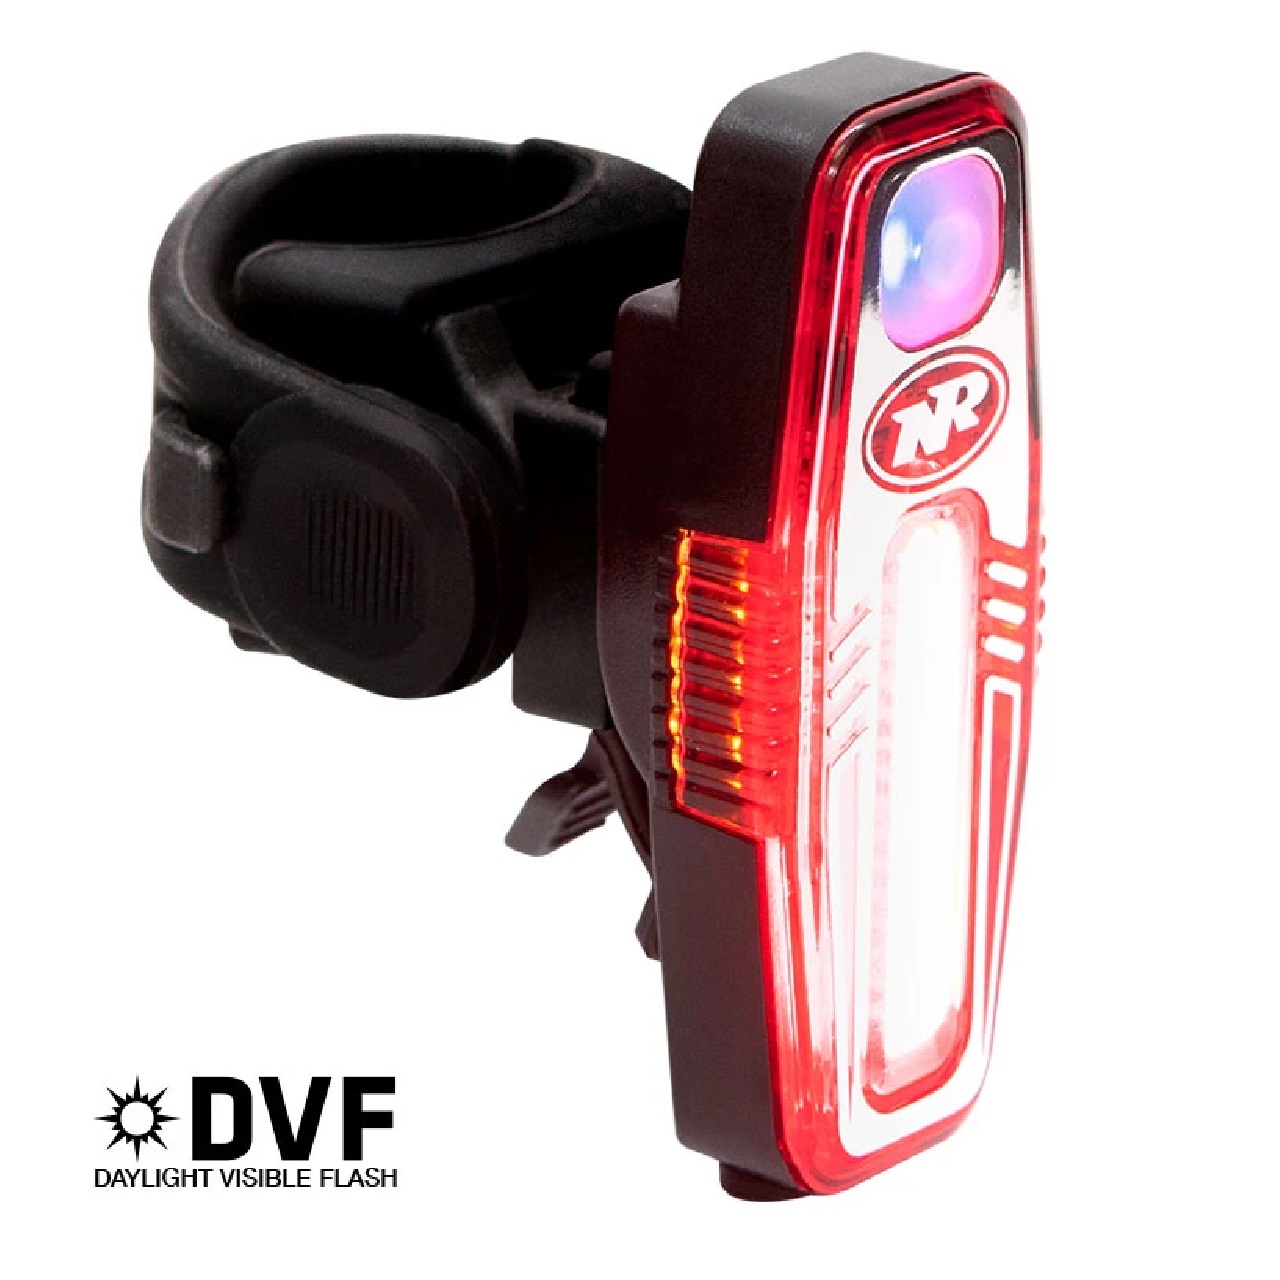 NiteRider Sabre 80 Super Bright LED Rechargeable Taillight 5087